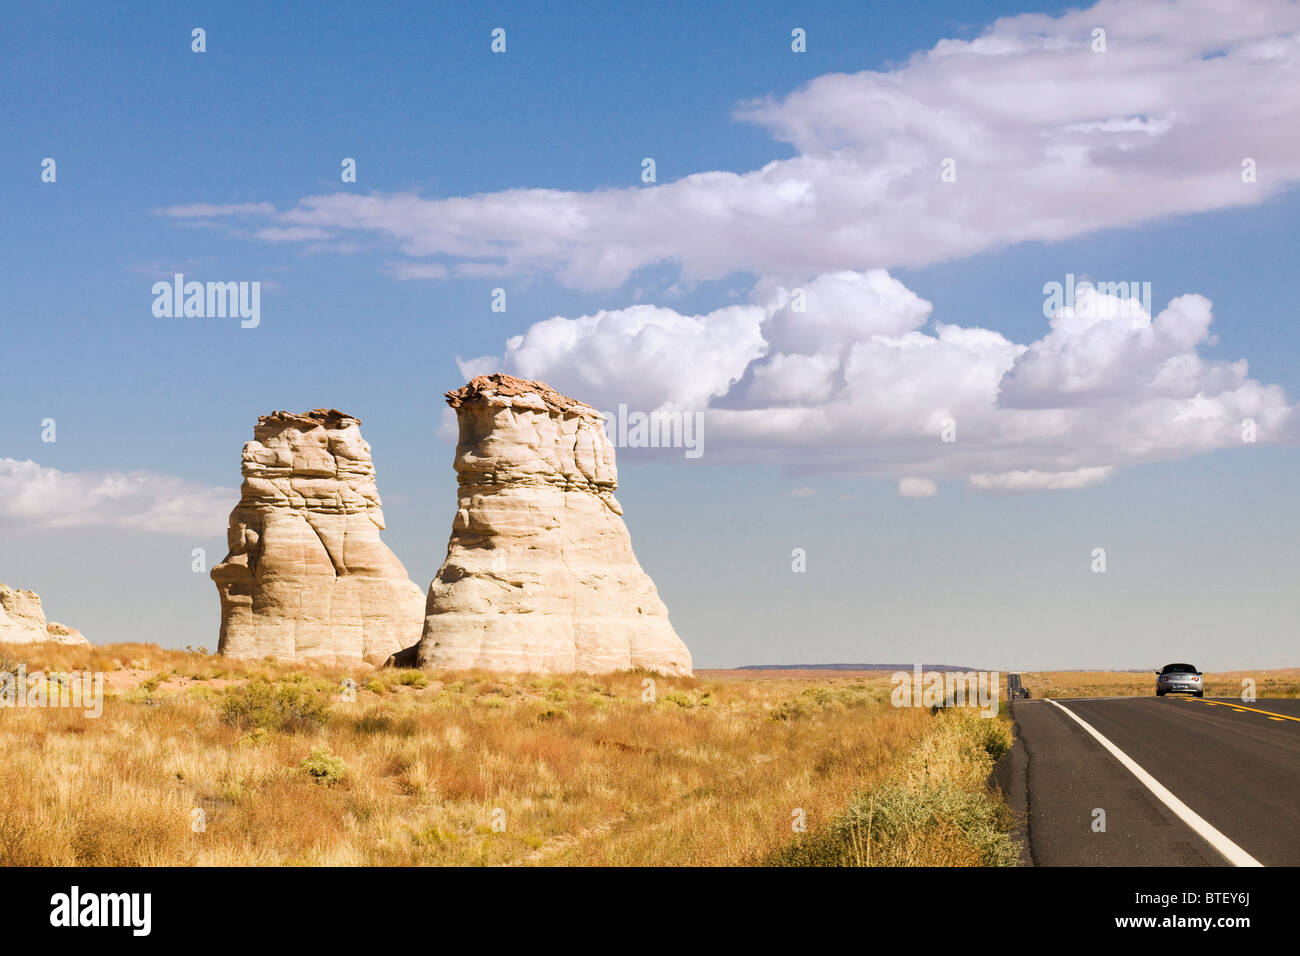 Sandstone sedimentary rock formations stand tall next to highway - Arizona USA Stock Photo